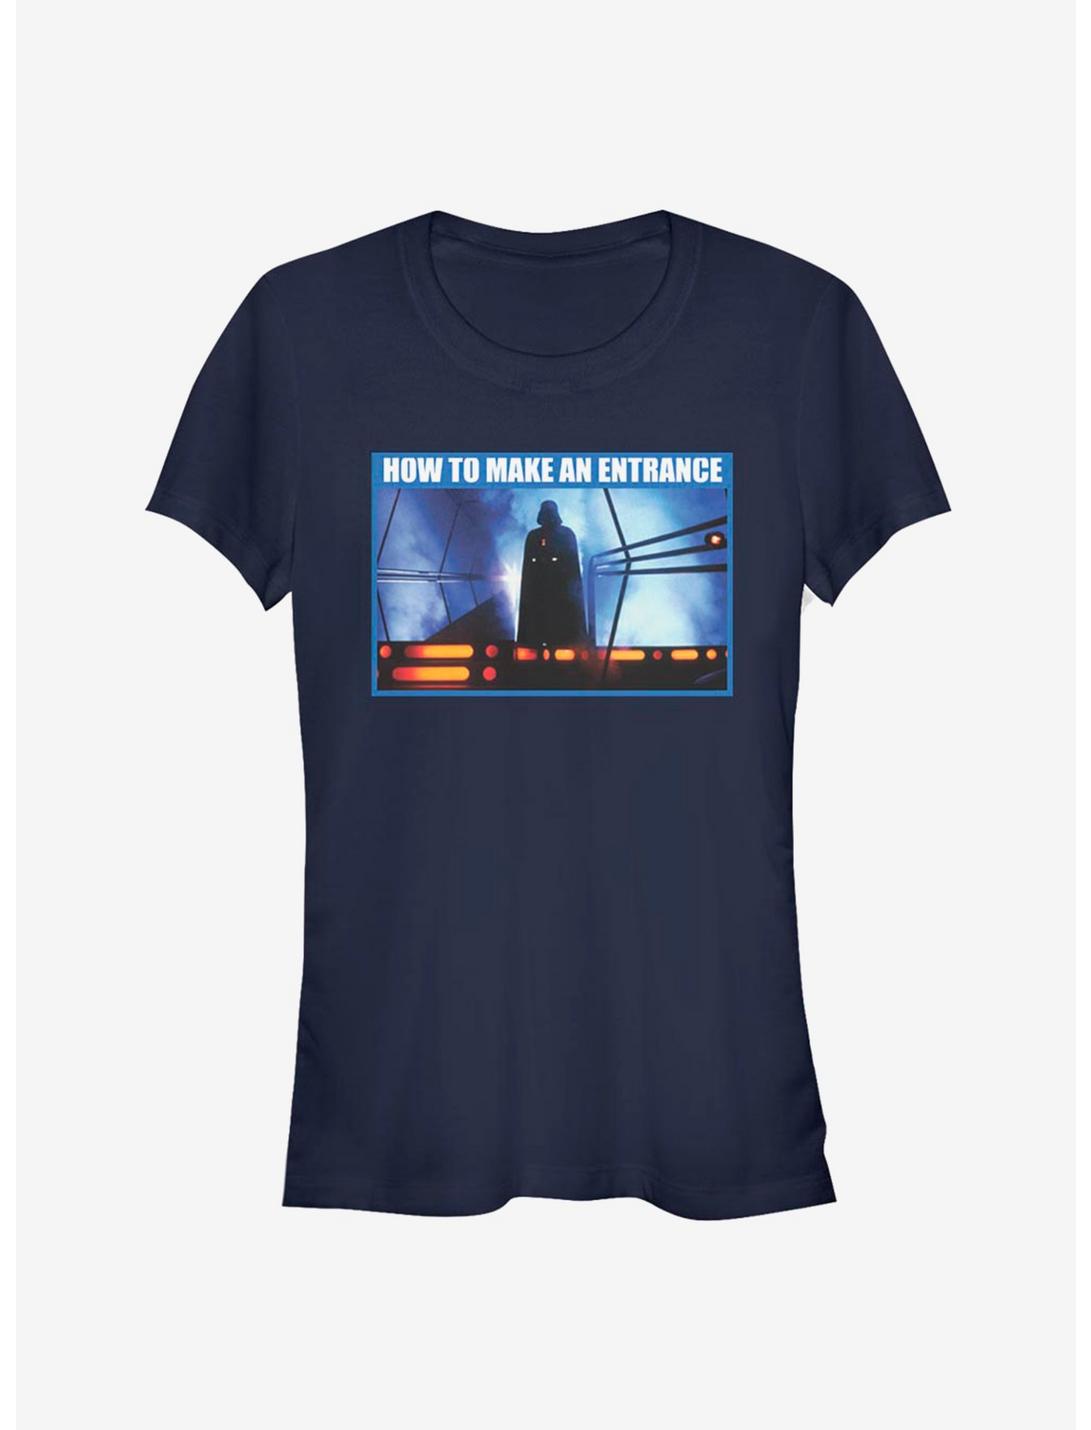 Star Wars How To Make An Entrance Girls T-Shirt, NAVY, hi-res